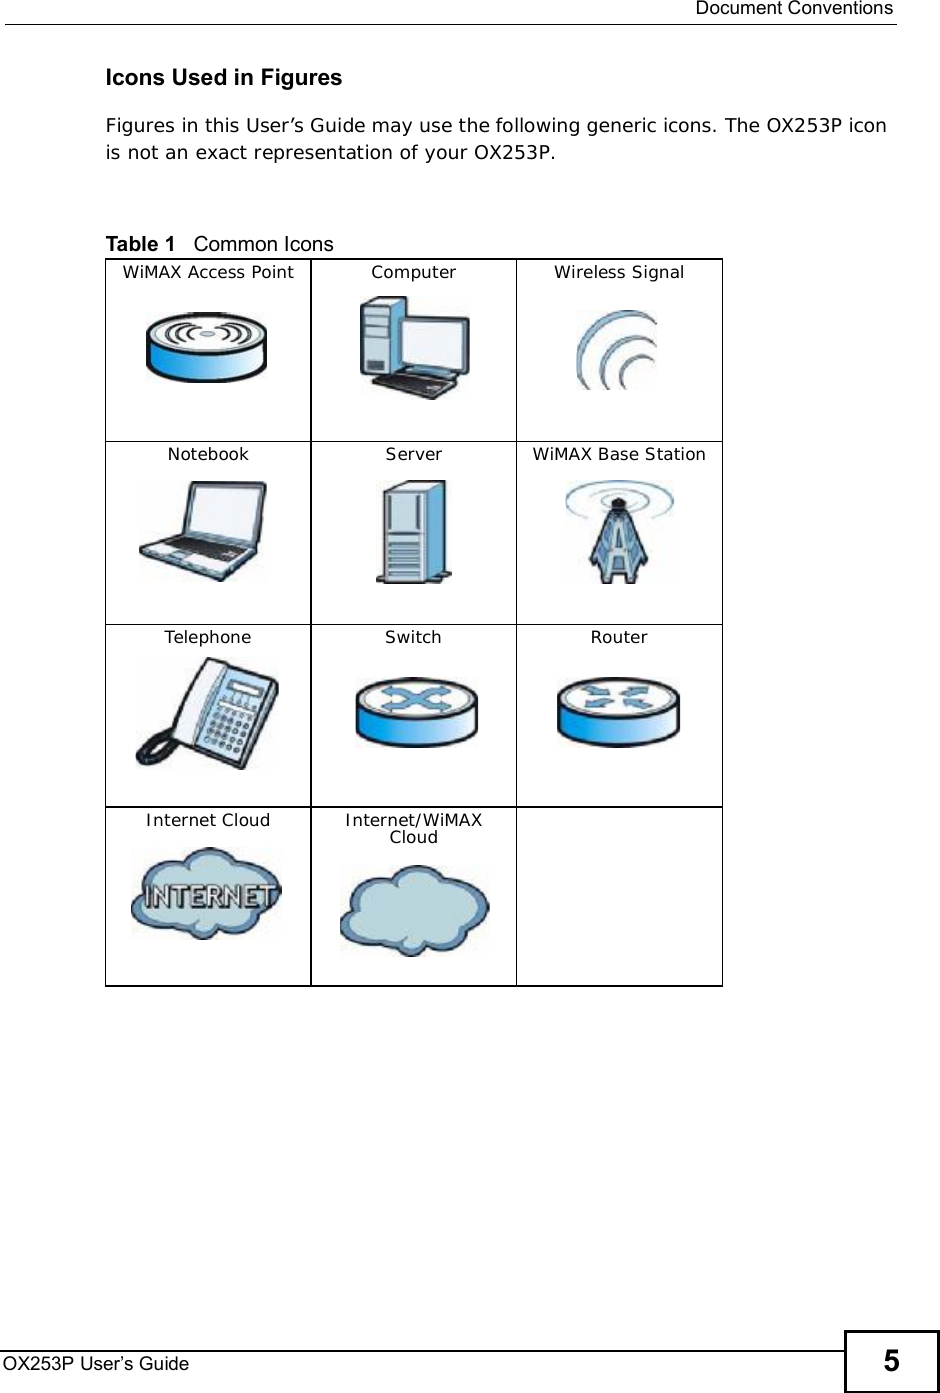  Document ConventionsOX253P User’s Guide 5Icons Used in FiguresFigures in this User’s Guide may use the following generic icons. The OX253P icon is not an exact representation of your OX253P.Table 1   Common IconsWiMAX Access PointComputerWireless SignalNotebookServerWiMAX Base StationTelephoneSwitchRouterInternet CloudInternet/WiMAX Cloud